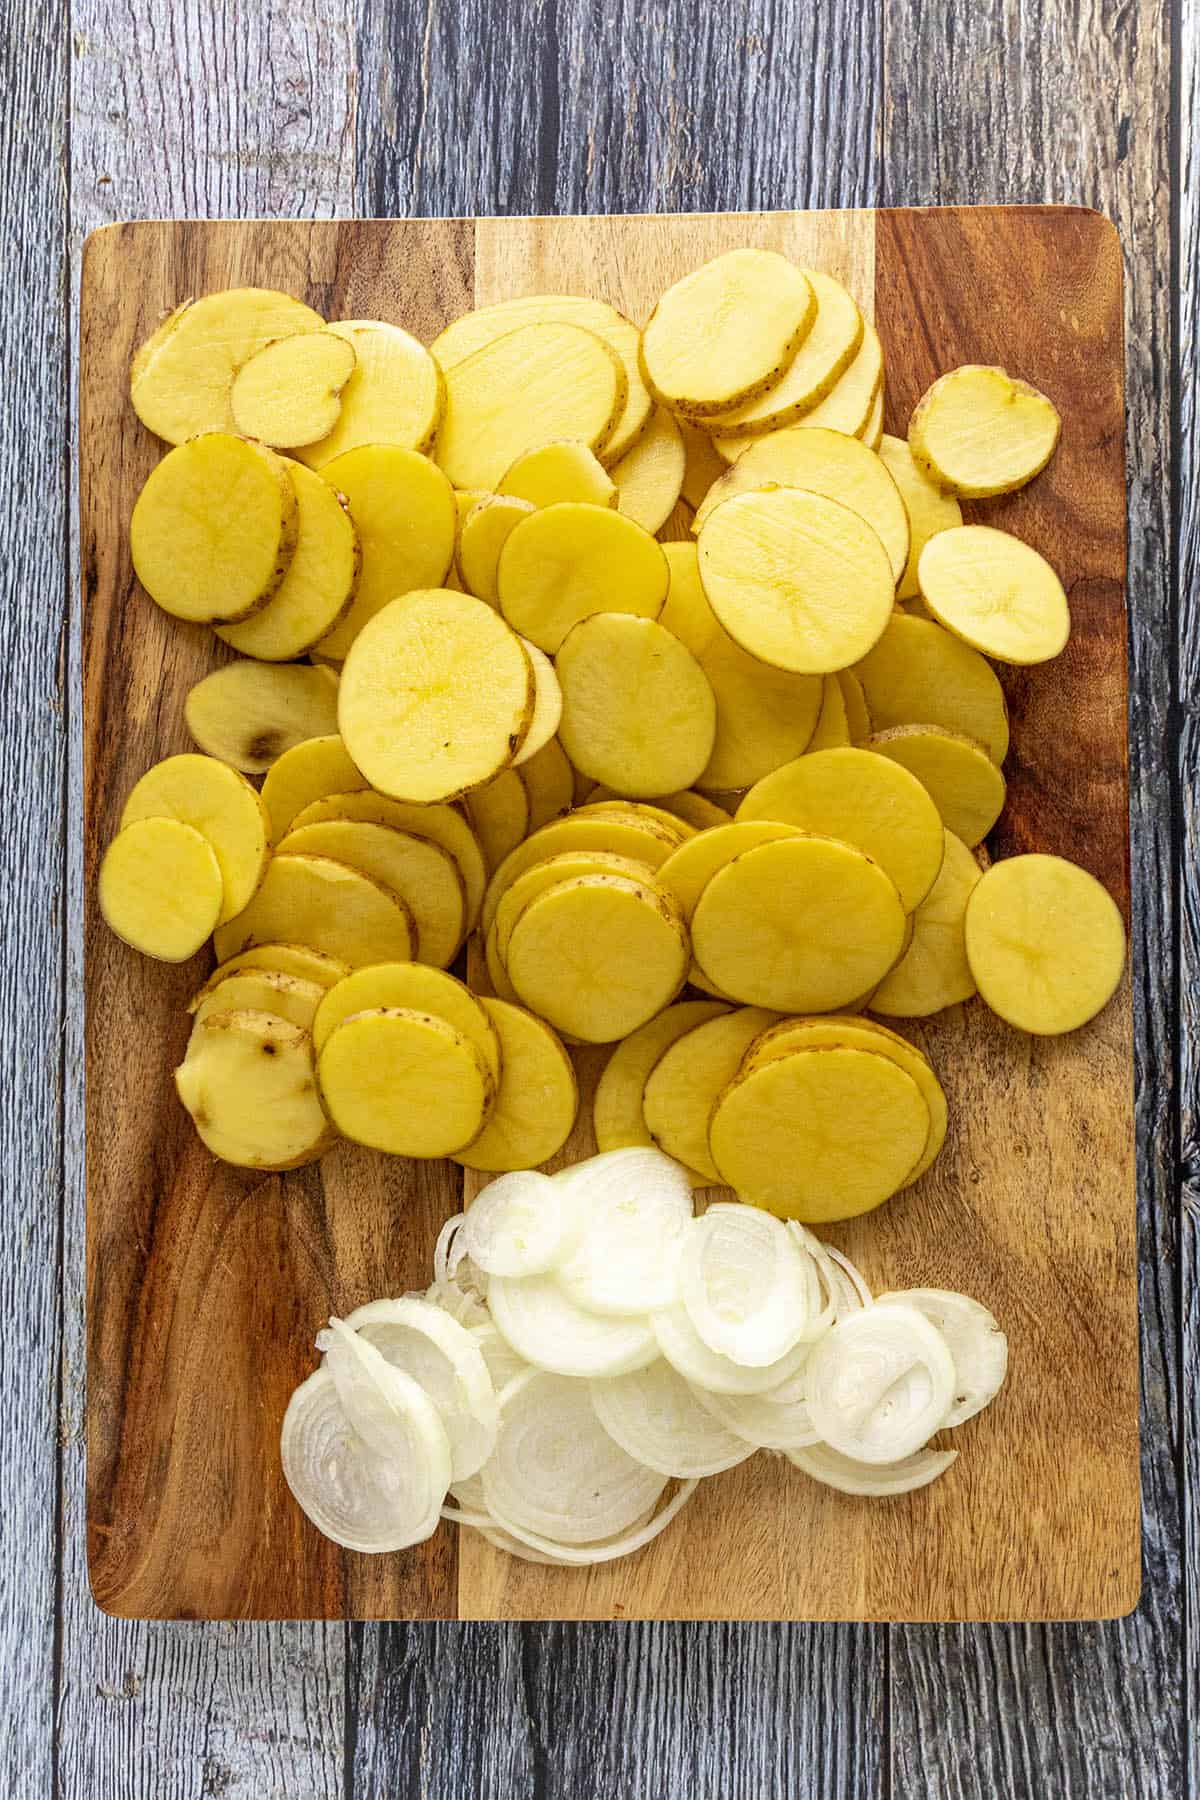 Scalloped Potatoes and Onions on a Cutting Board